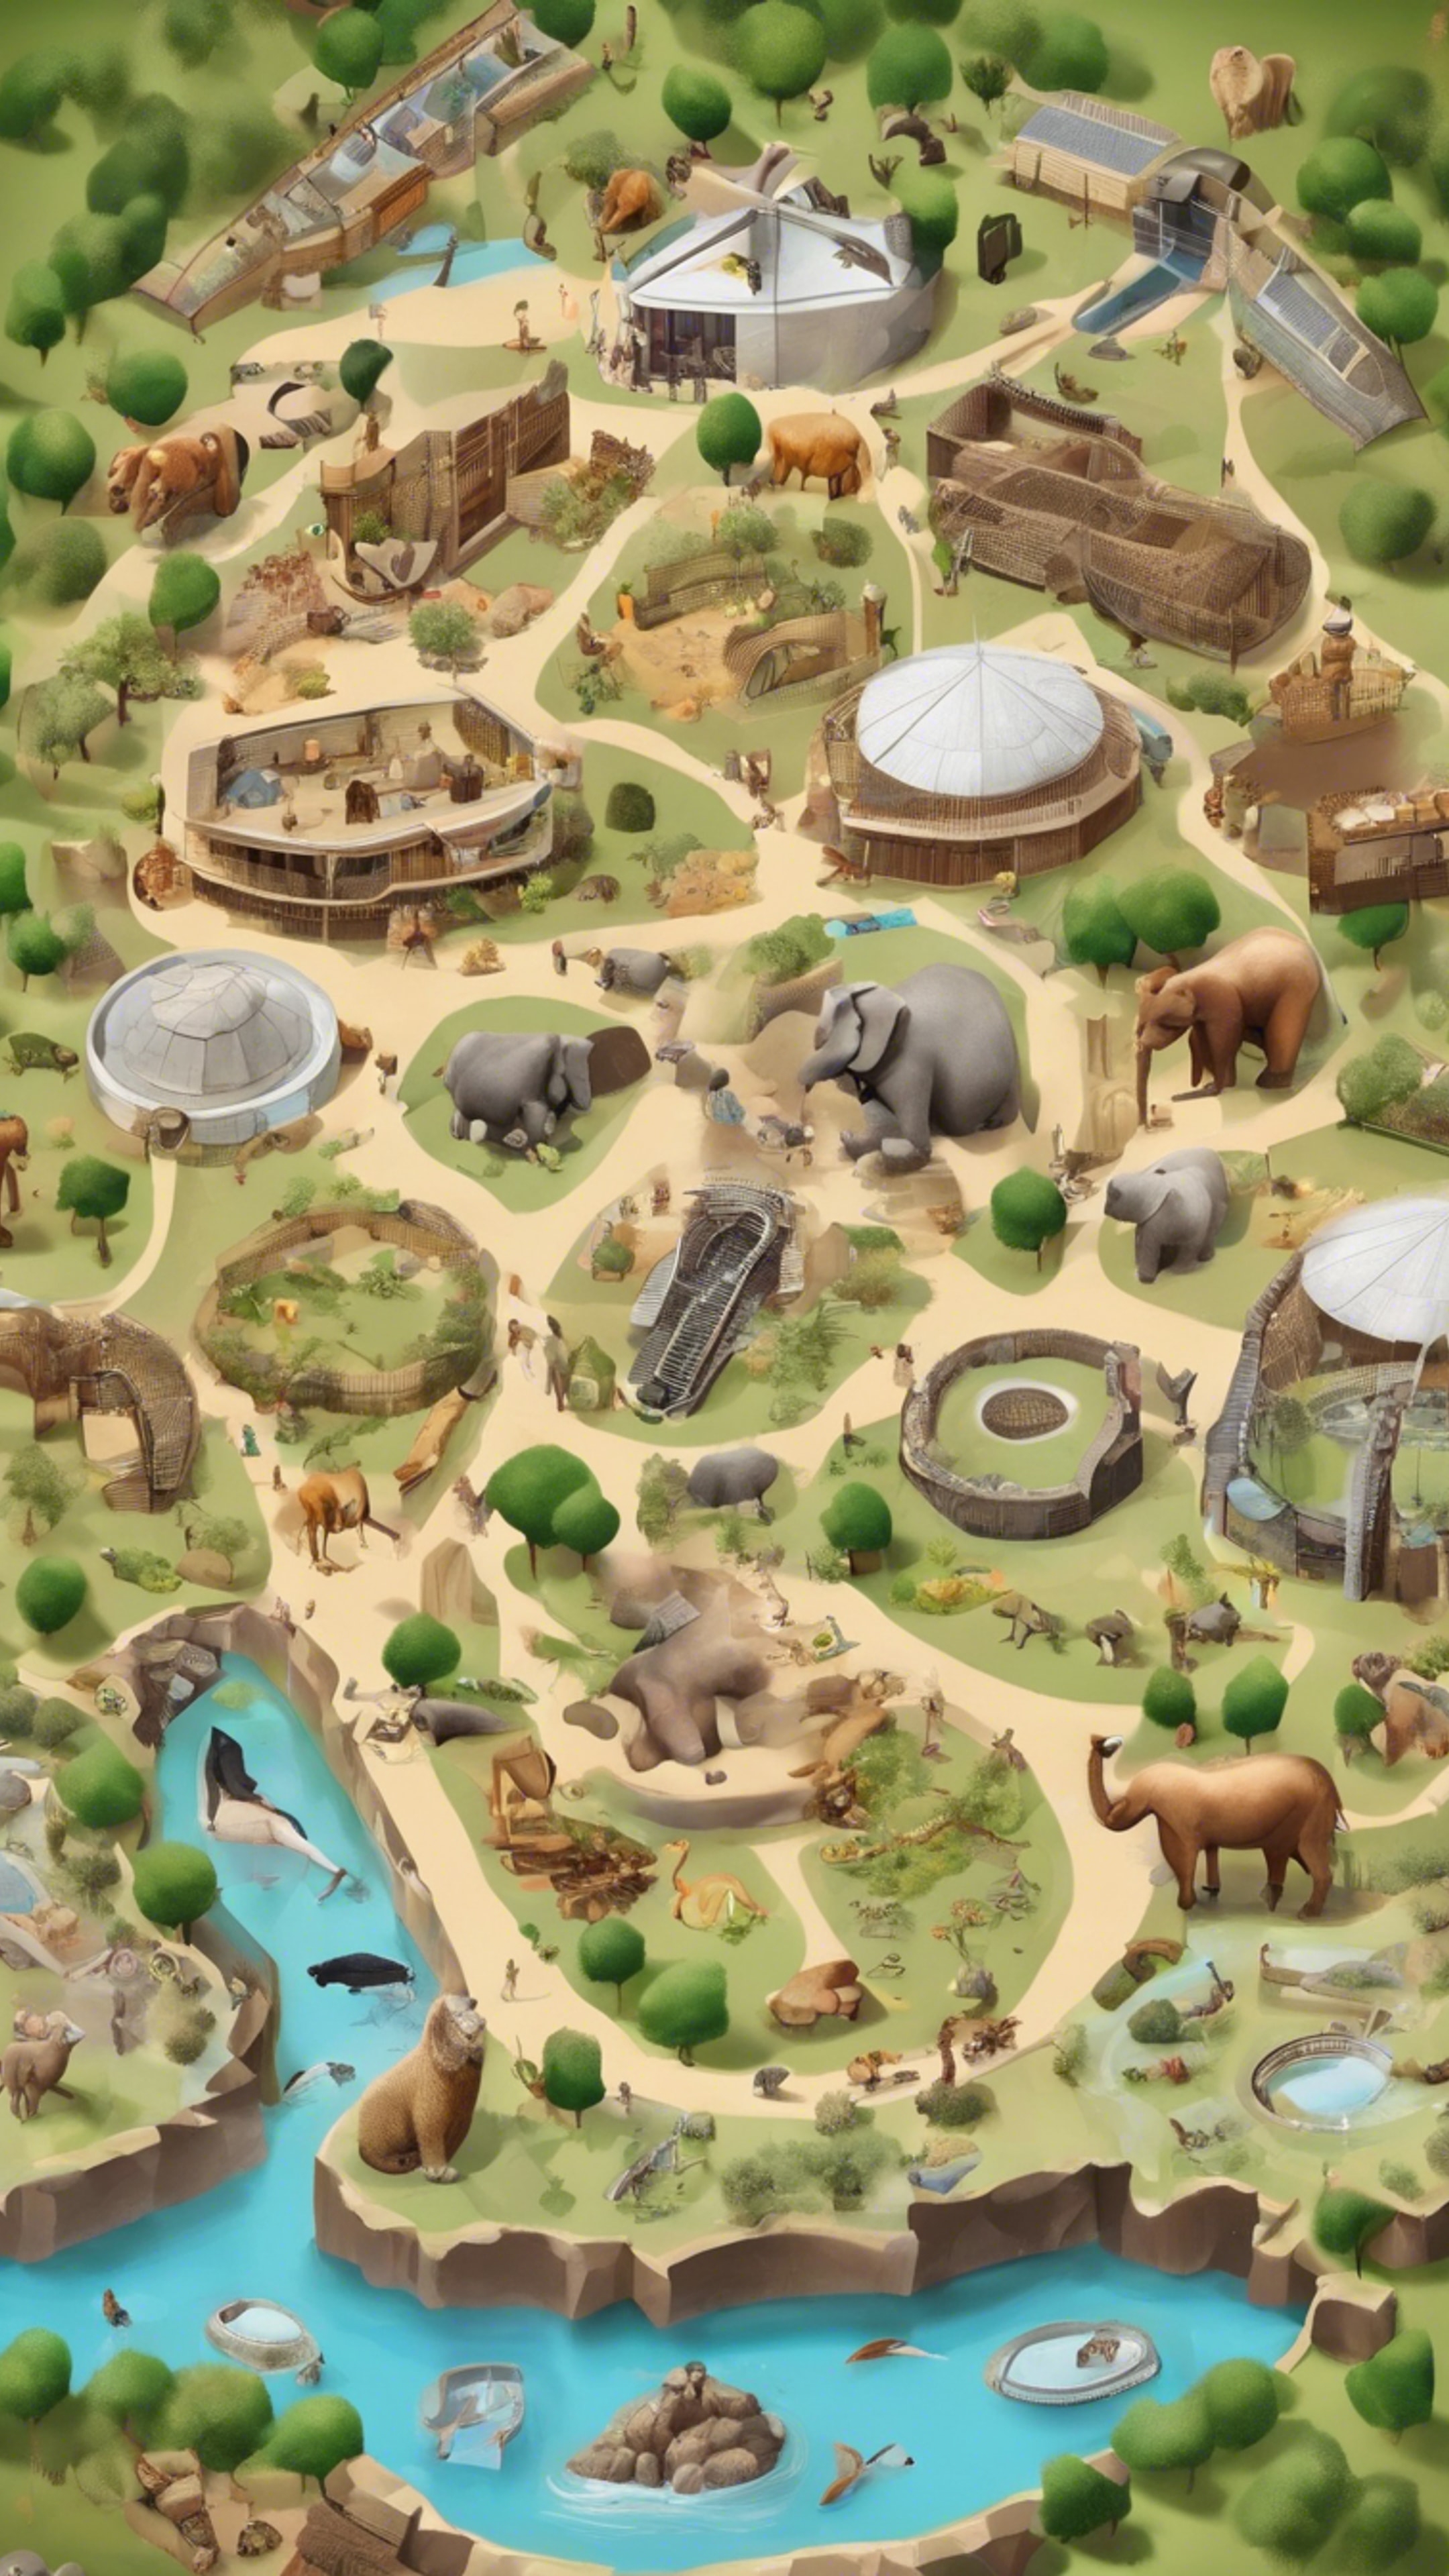 A graphic map of a zoo, with different animal enclosures, food stalls and amenities. Обои[7d3ed7eed3f244f7a17f]